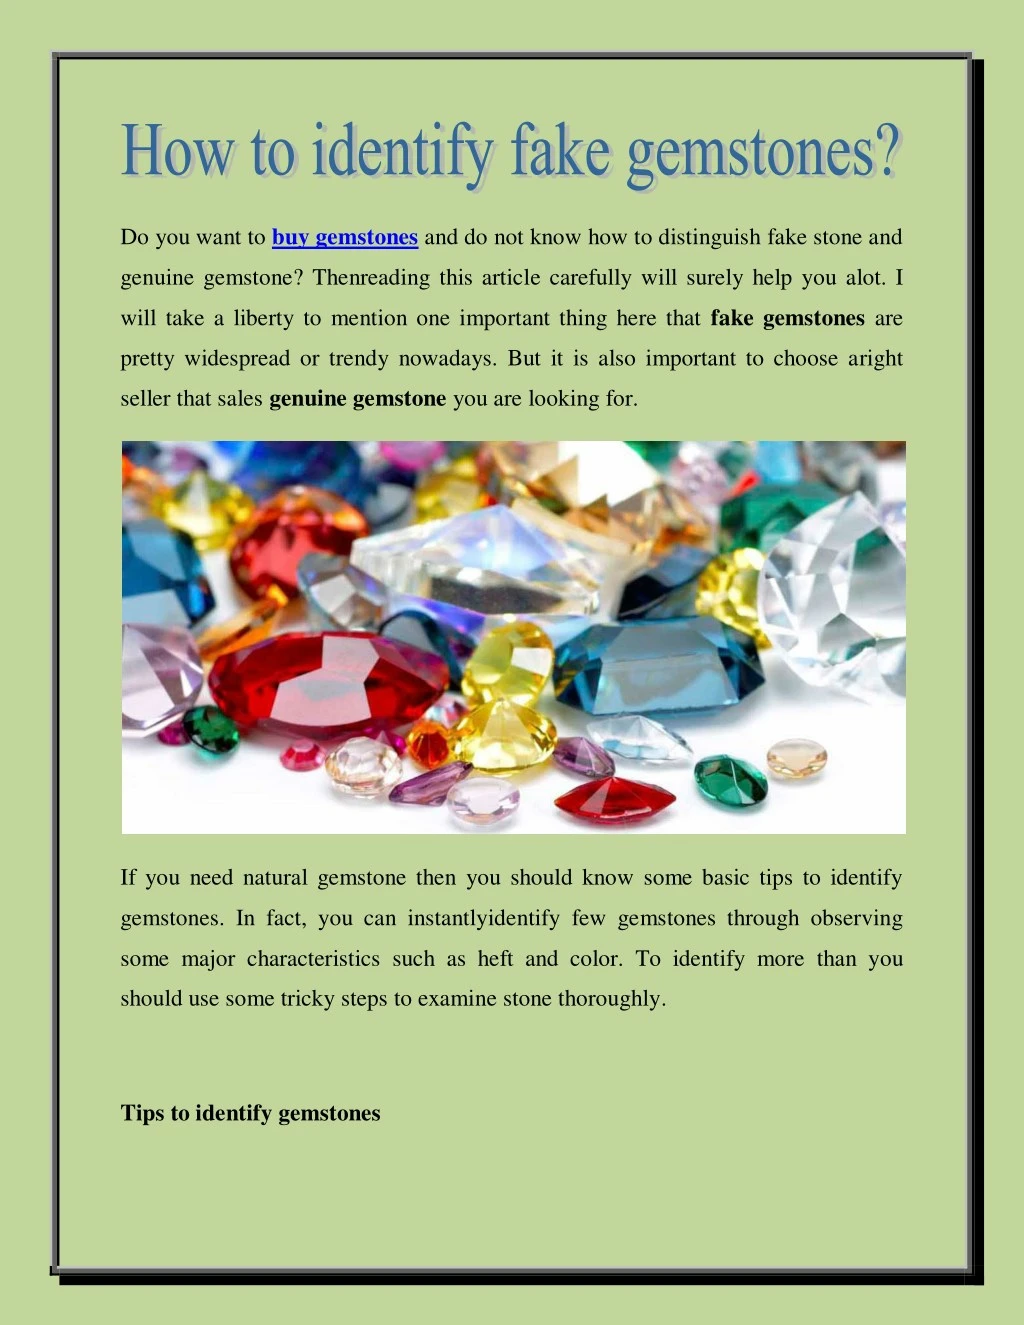 do you want to buy gemstones and do not know